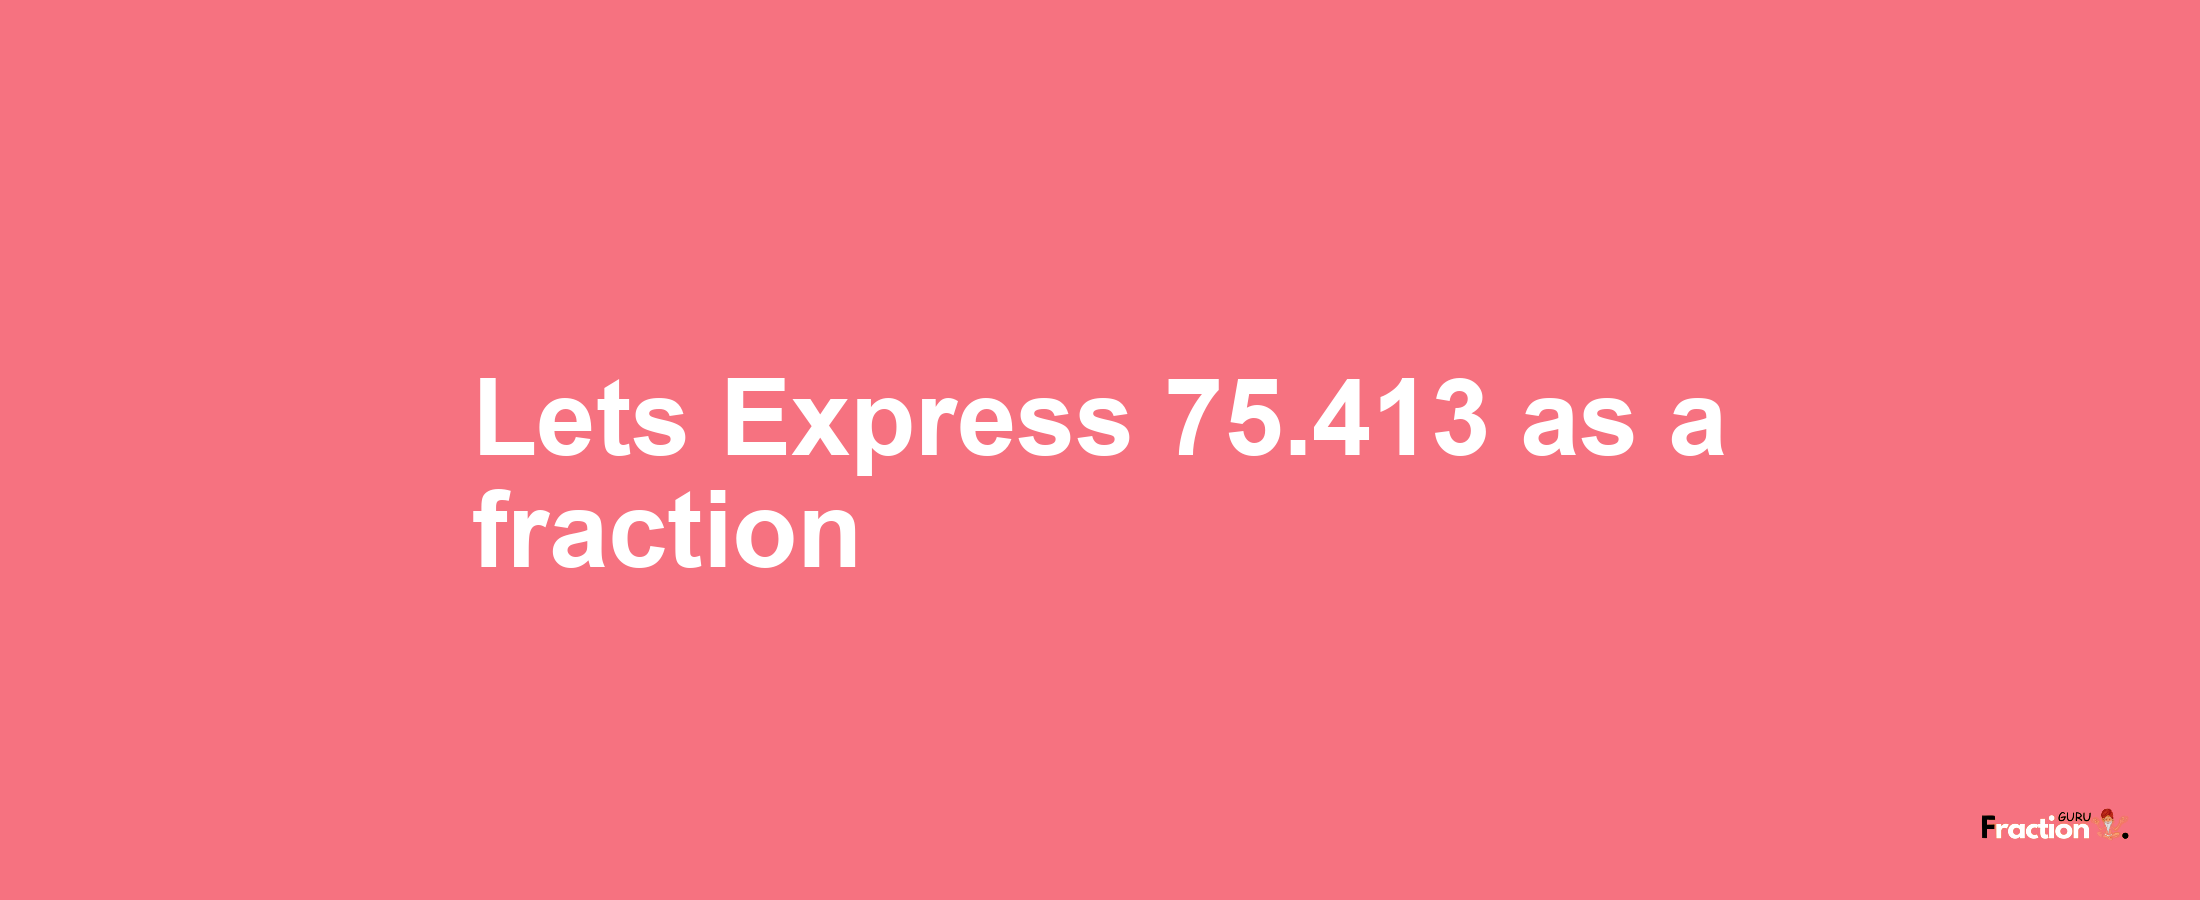 Lets Express 75.413 as afraction